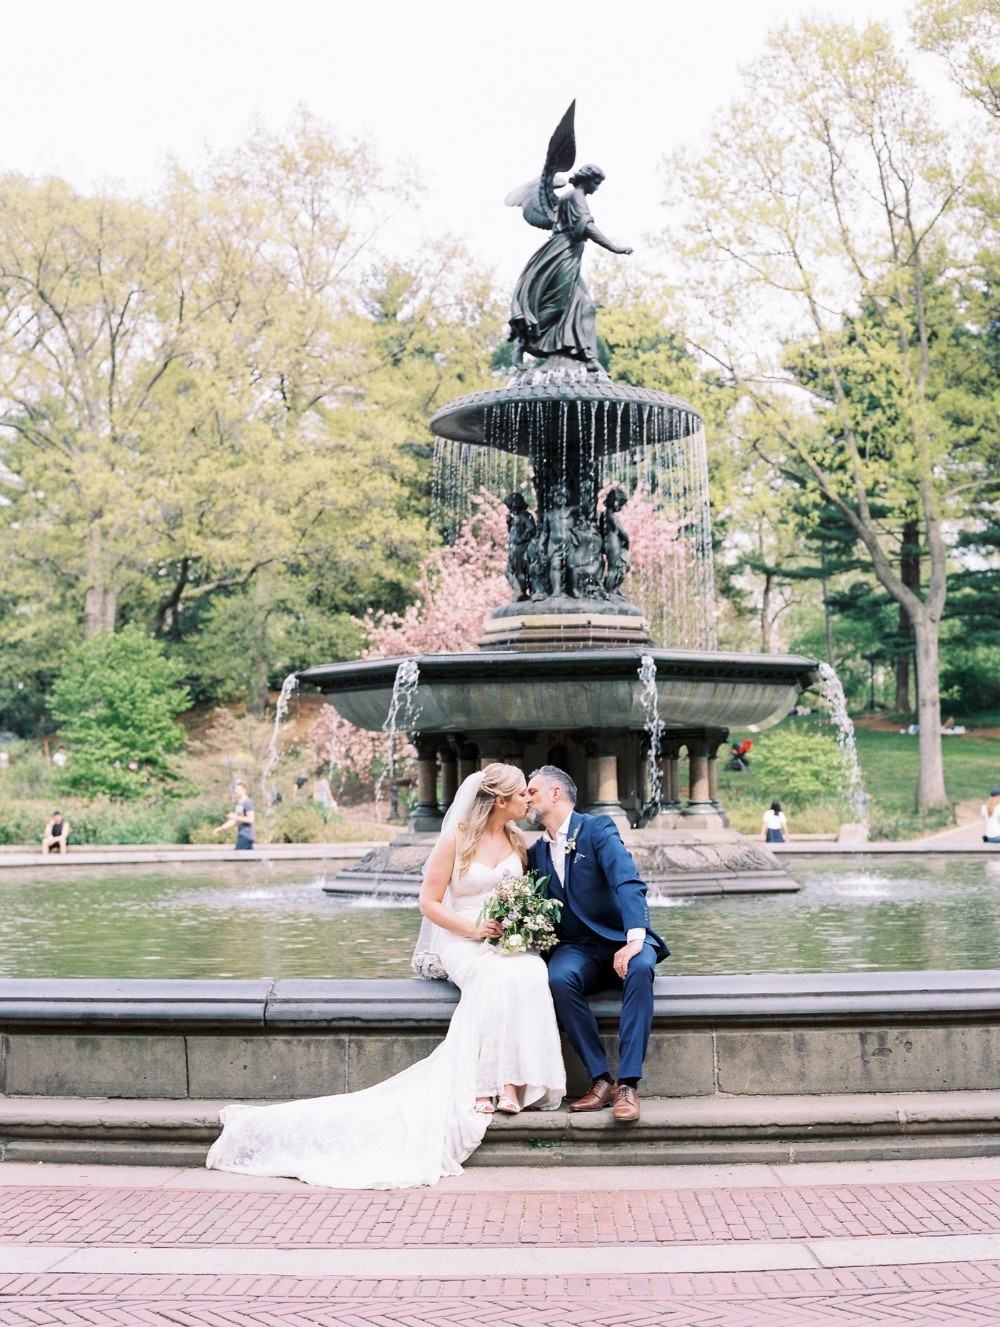 Central Park Micro Wedding Surrounded by Cherry Blossoms ⋆ Ruffled